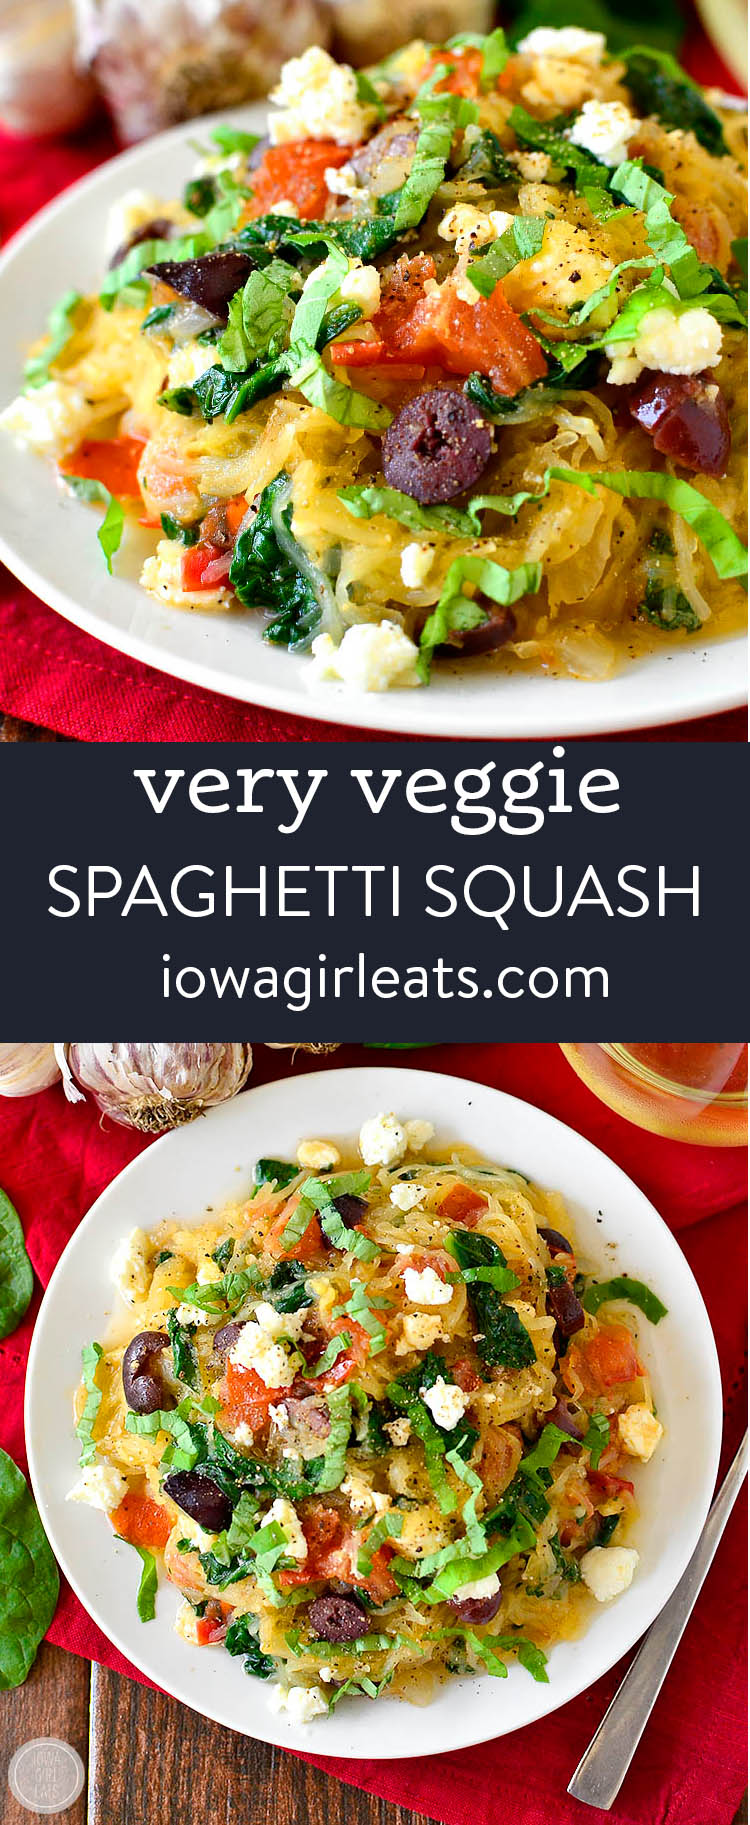 cooked spaghetti squash with vegetables and cheese on a plate